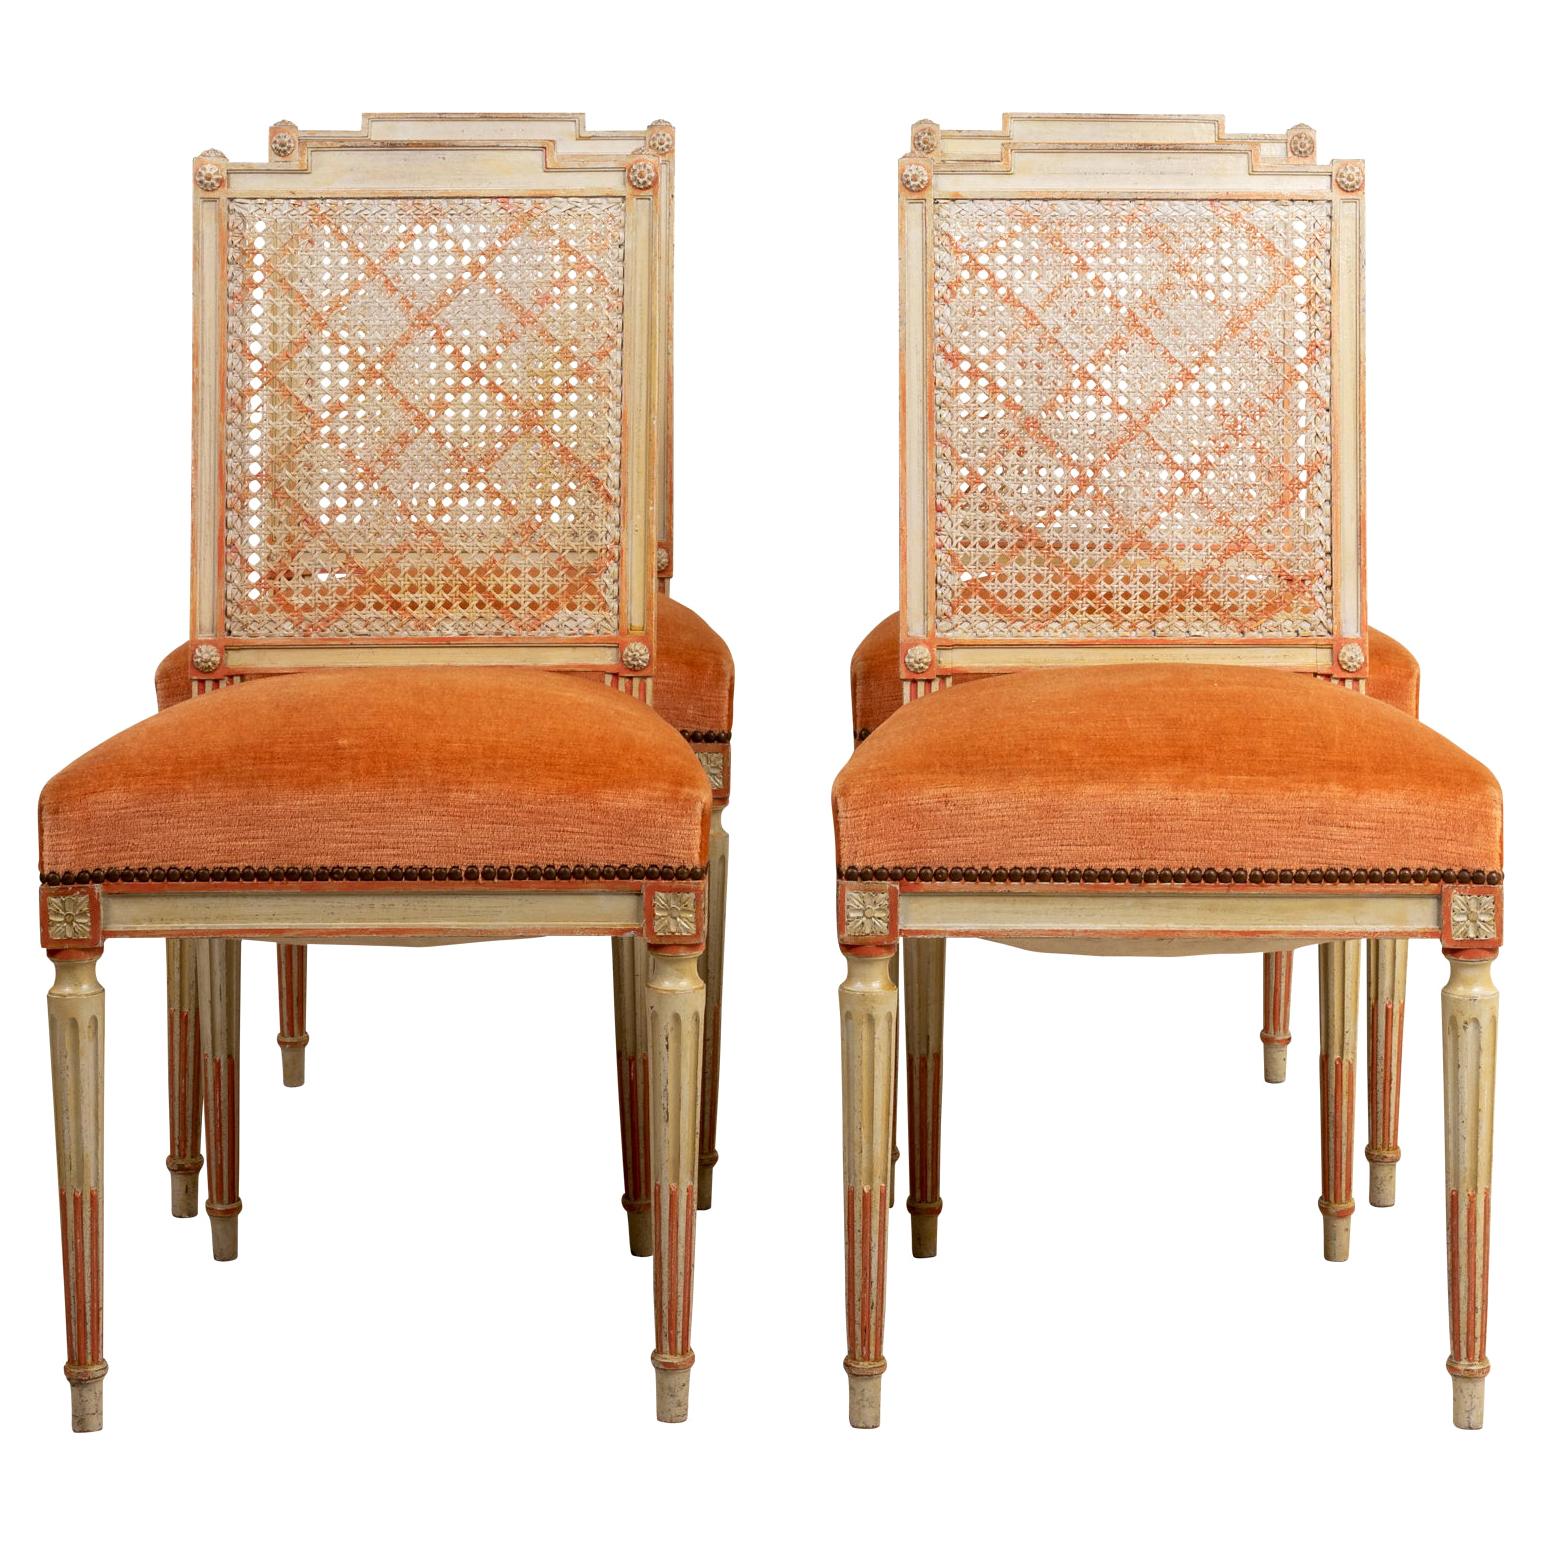 Set of Four Caned and Painted Side Chairs